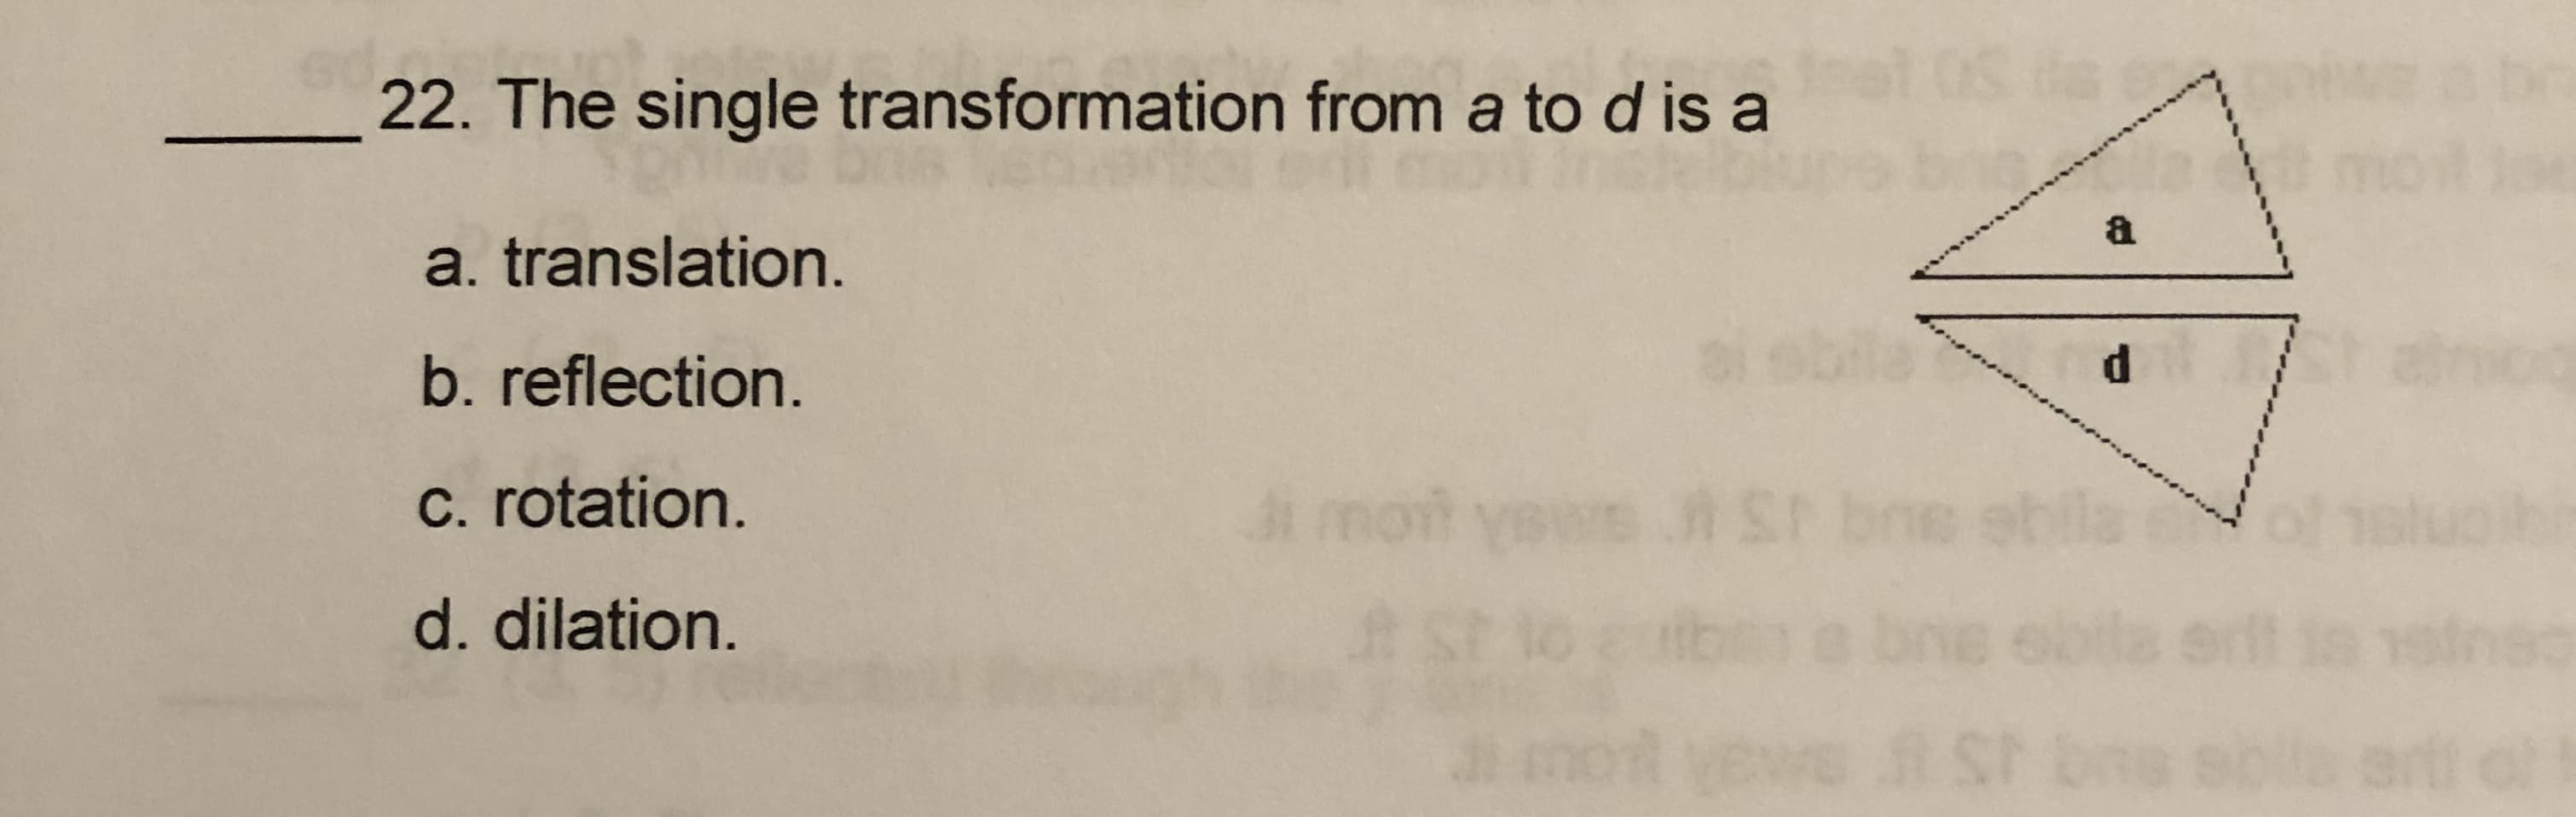 22. The single transformation from a to d is a
a
a. translation.
b. reflection.
ai sbila
c. rotation.
i mot yews AS bne sbila
d. dilation.
